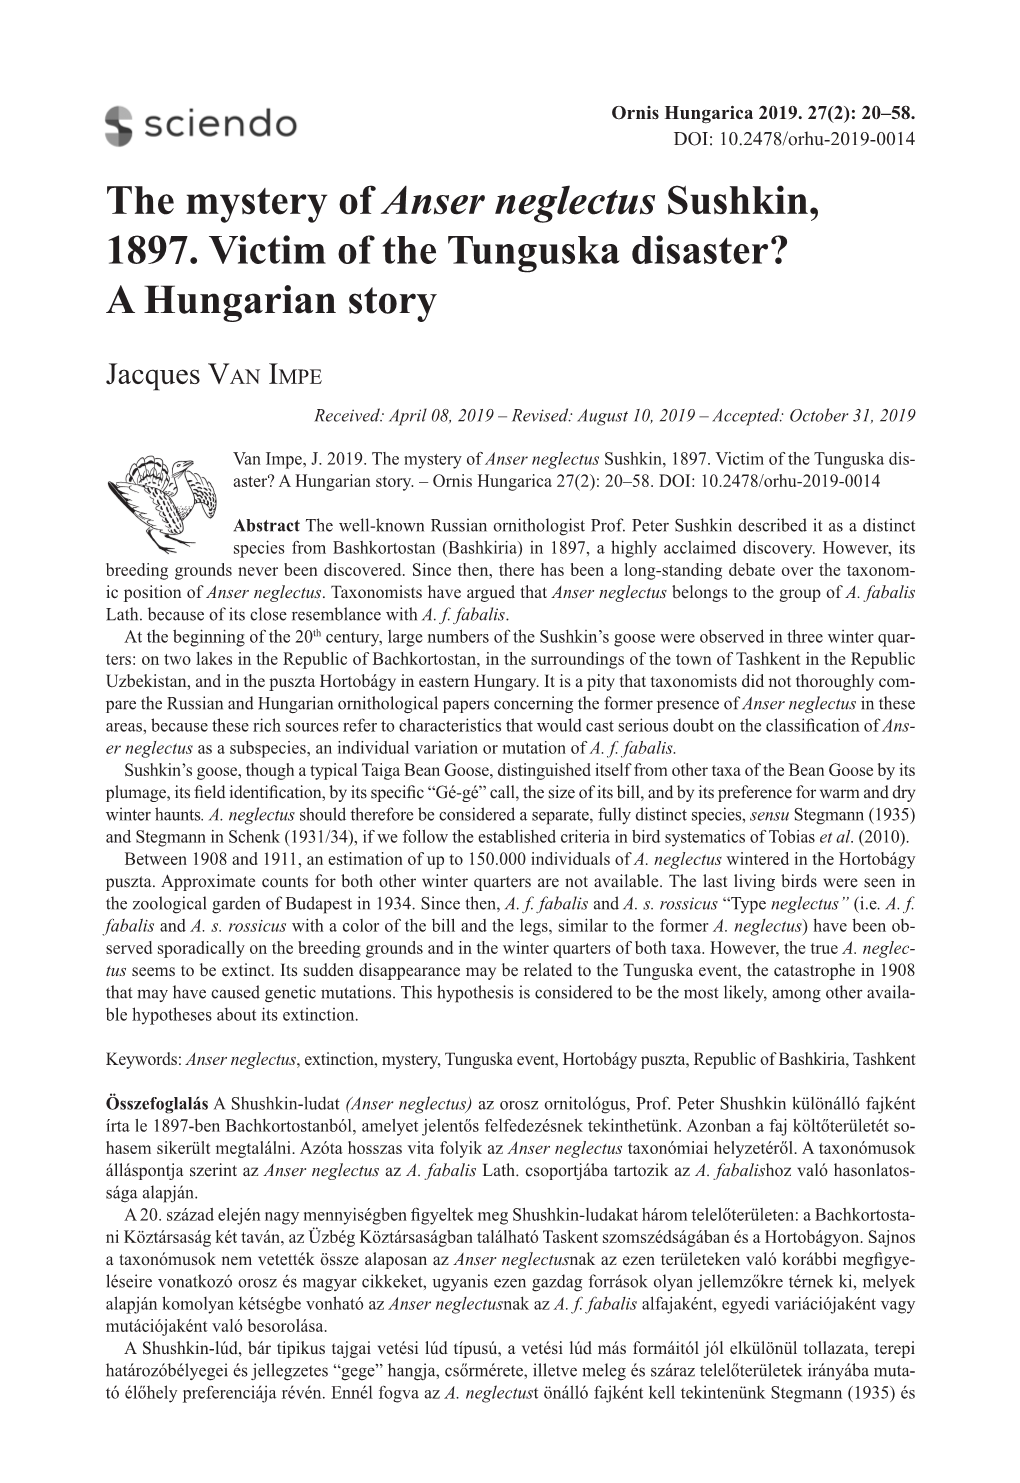 The Mystery of Anser Neglectus Sushkin, 1897. Victim of the Tunguska Disaster? a Hungarian Story